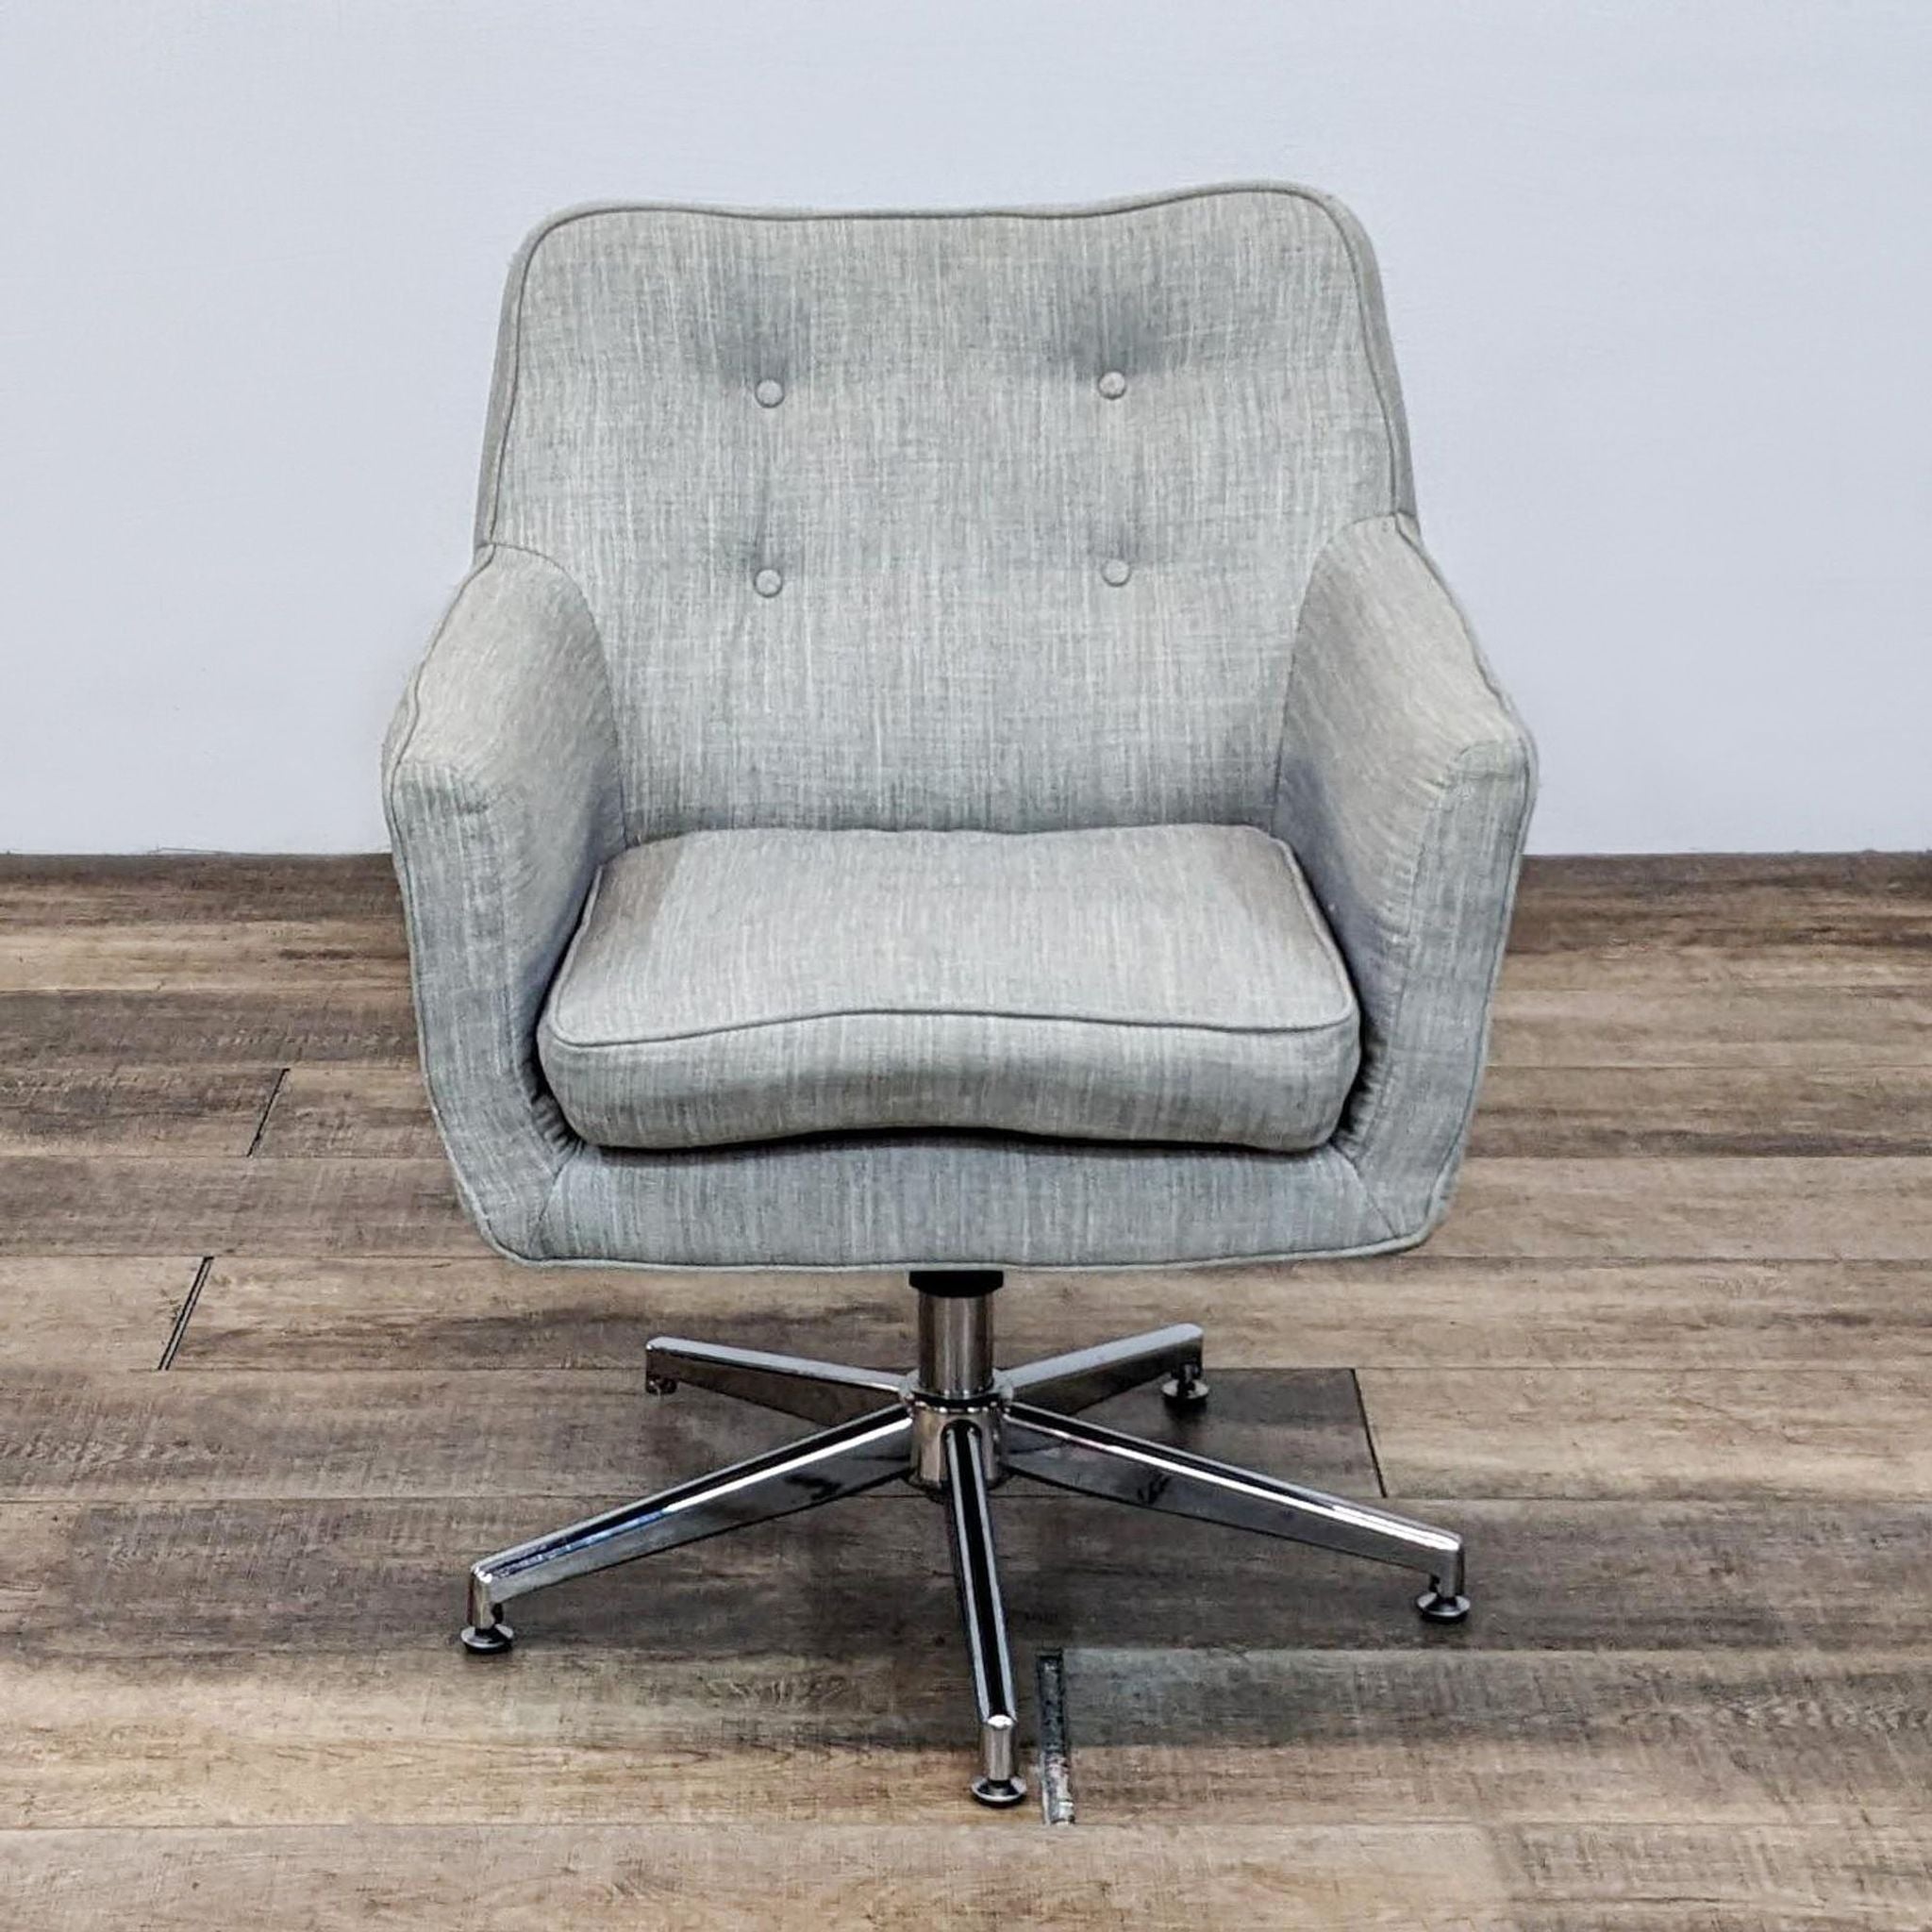 Reperch linen fabric upholstered armchair with button tufting and adjustable chrome swivel base, front view.